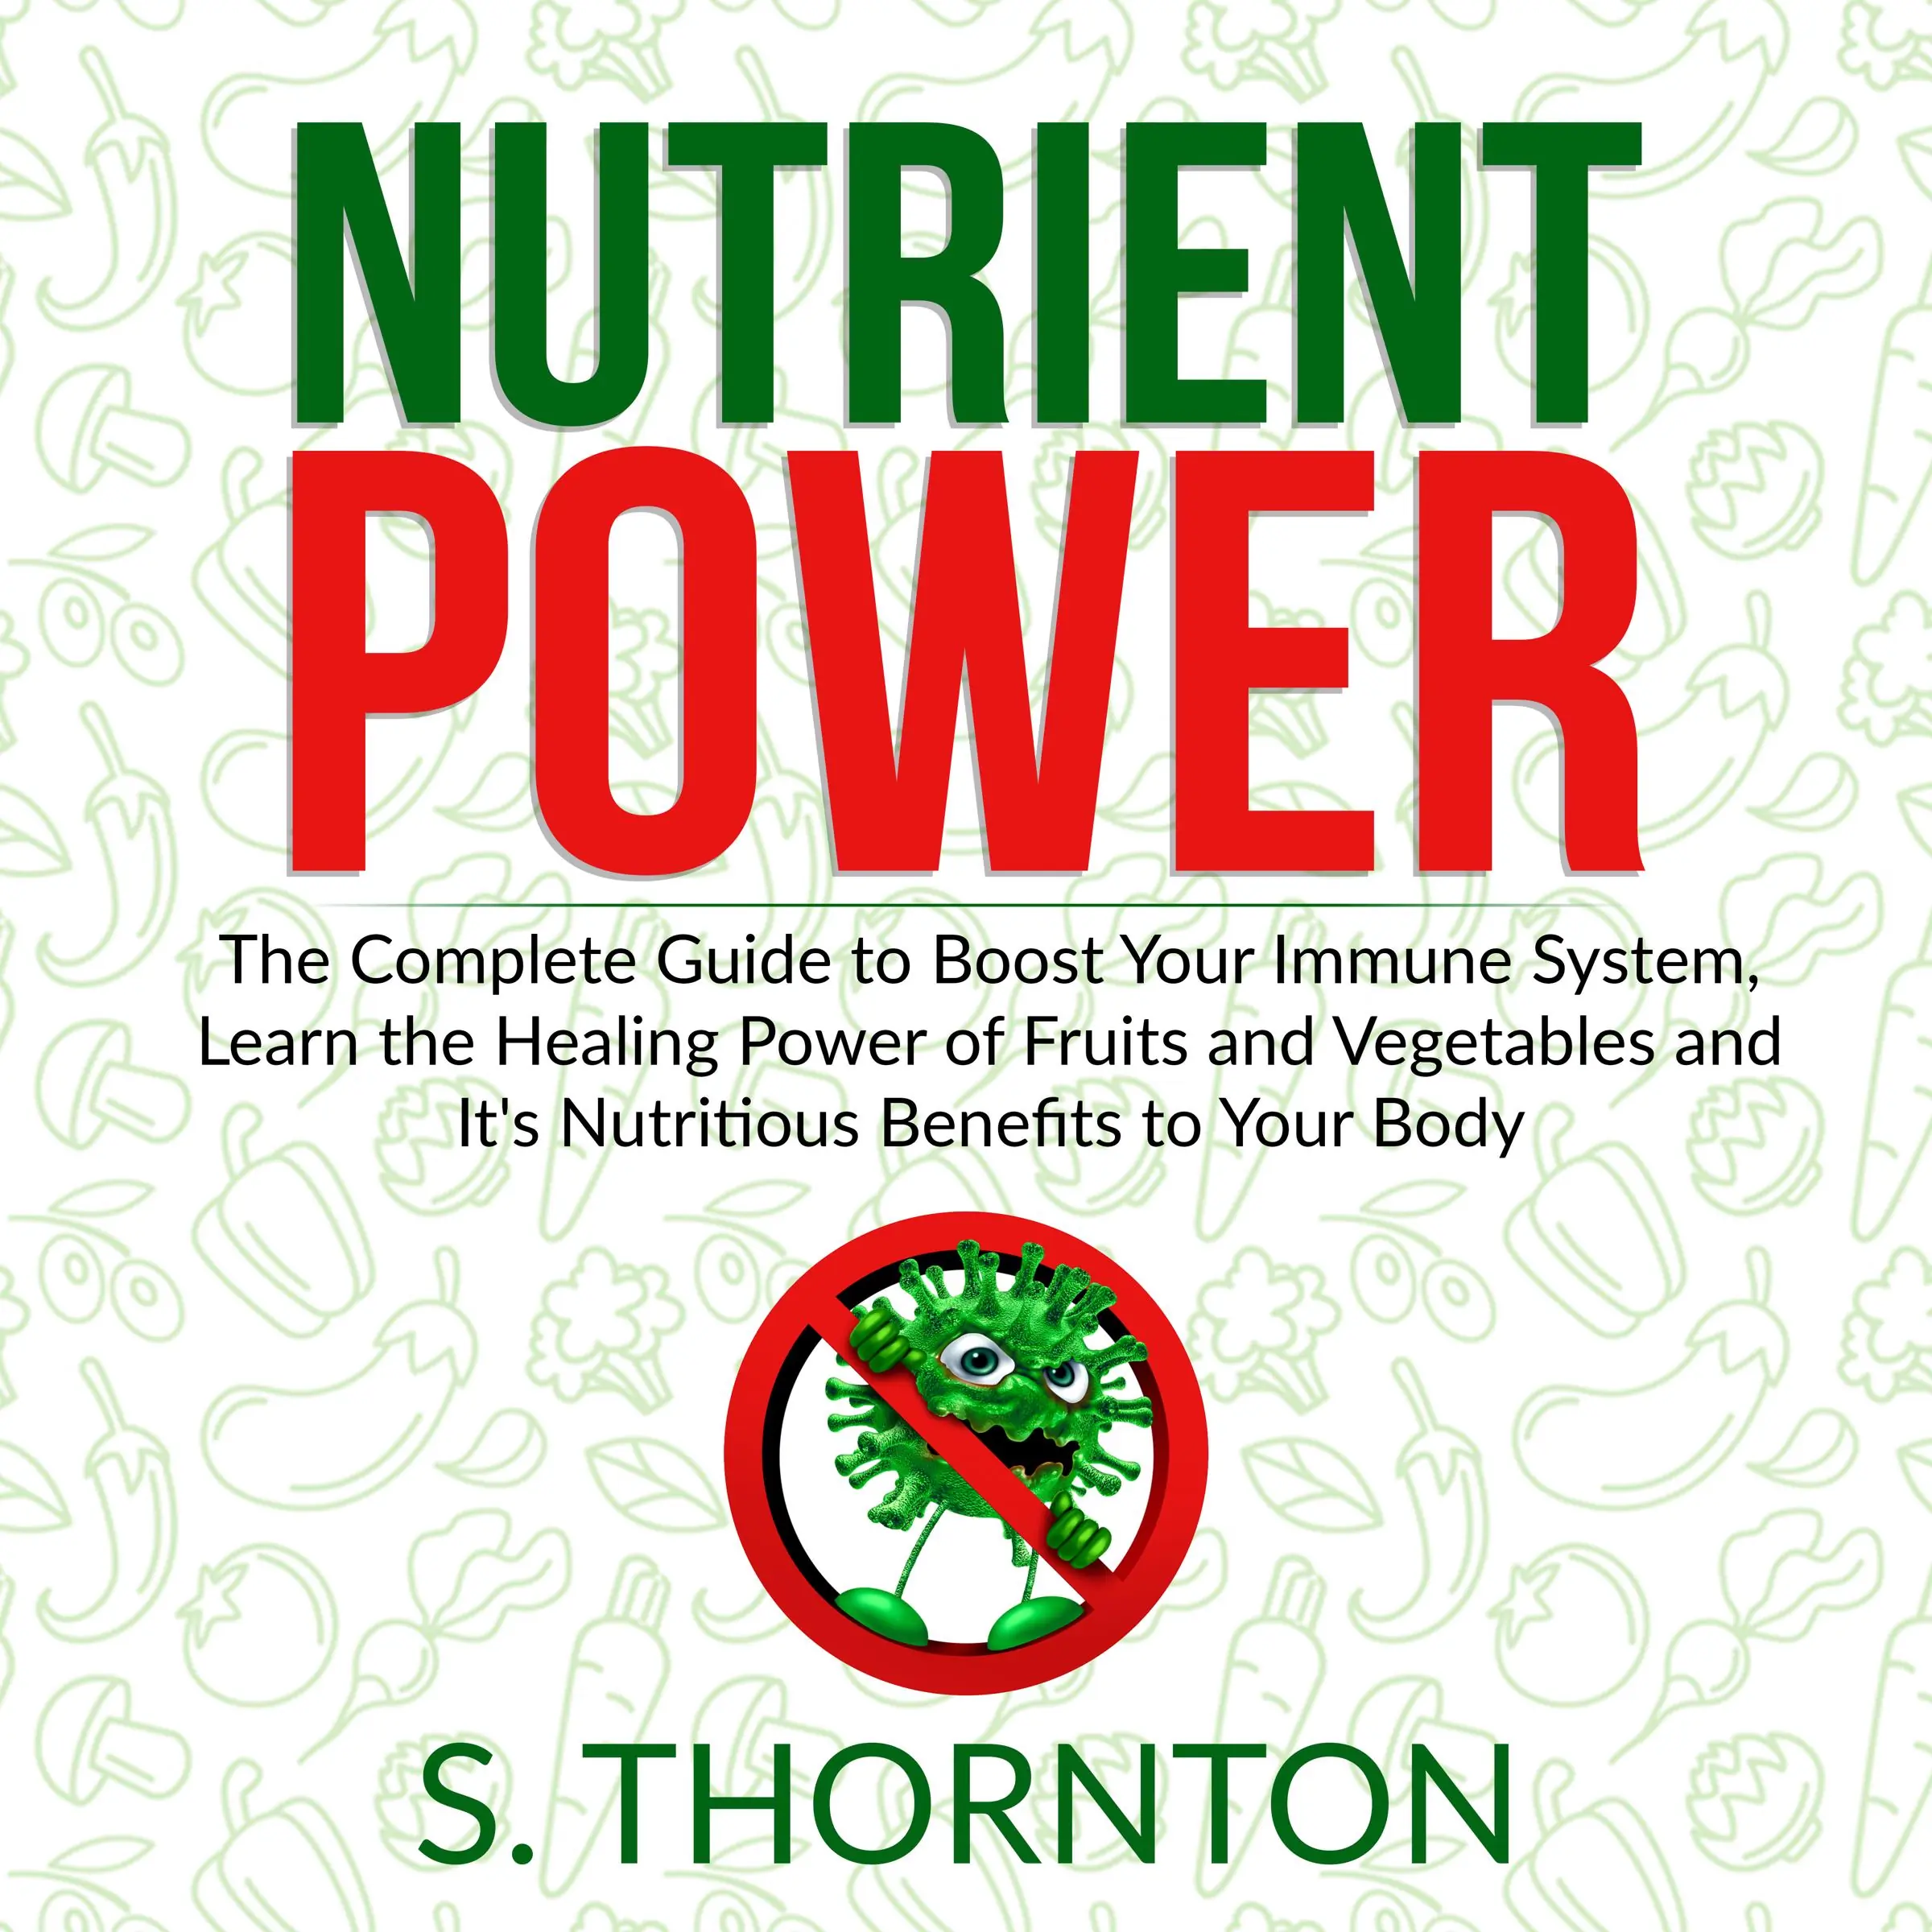 Nutrient Power: The Complete Guide to Boost Your Immune System, Learn the Healing Power of Fruits and Vegetables and It's Nutrious Benefits to Your Body Audiobook by S. Thornton